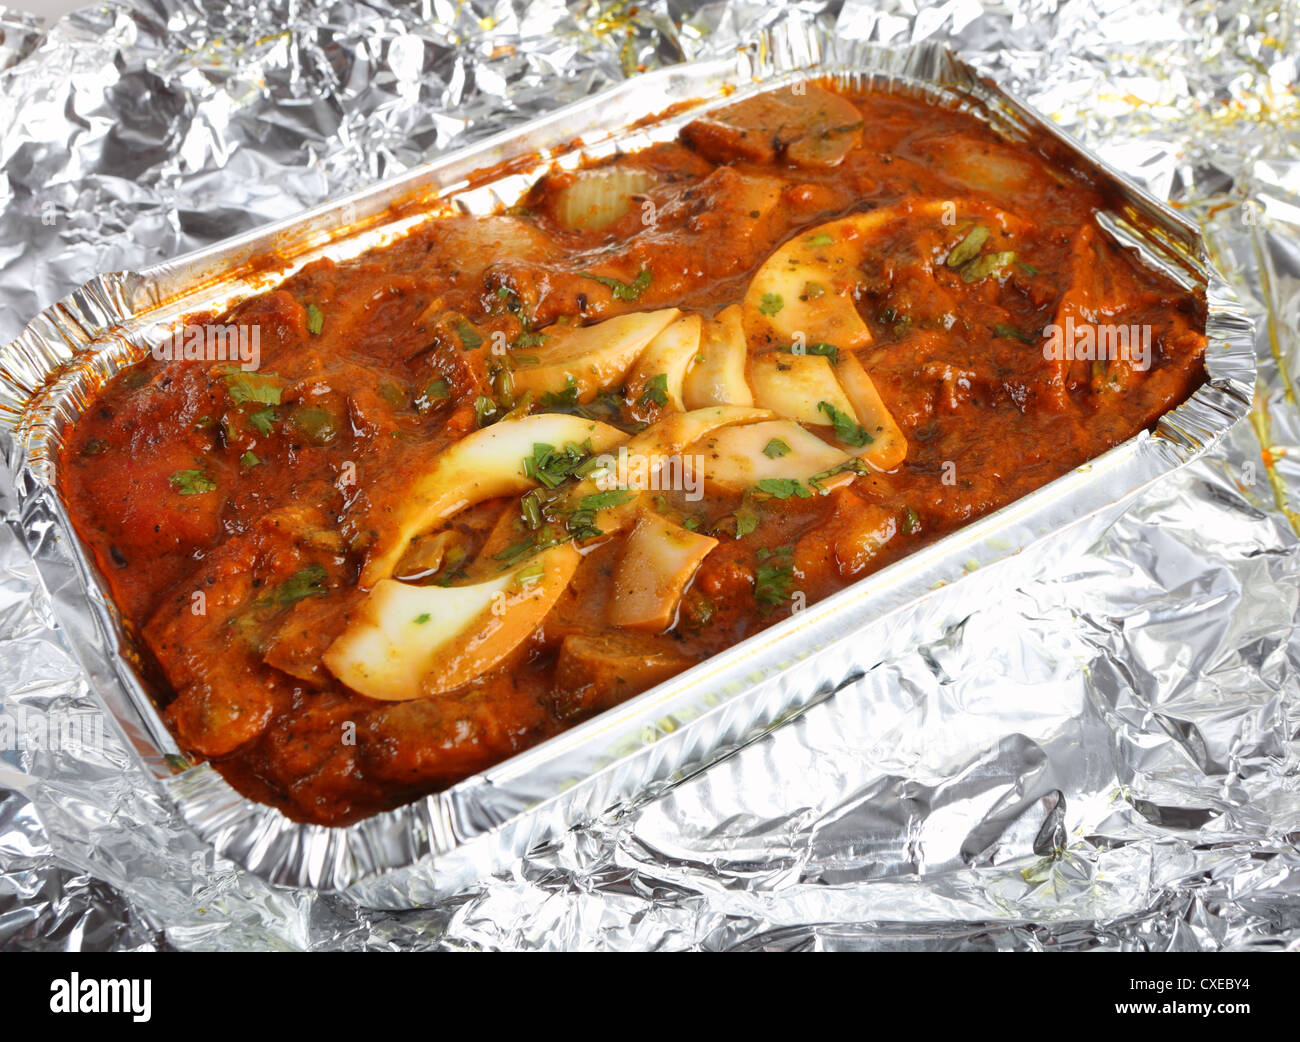 Chicken jalfrezi curry garnished with egg and coriander. Stock Photo